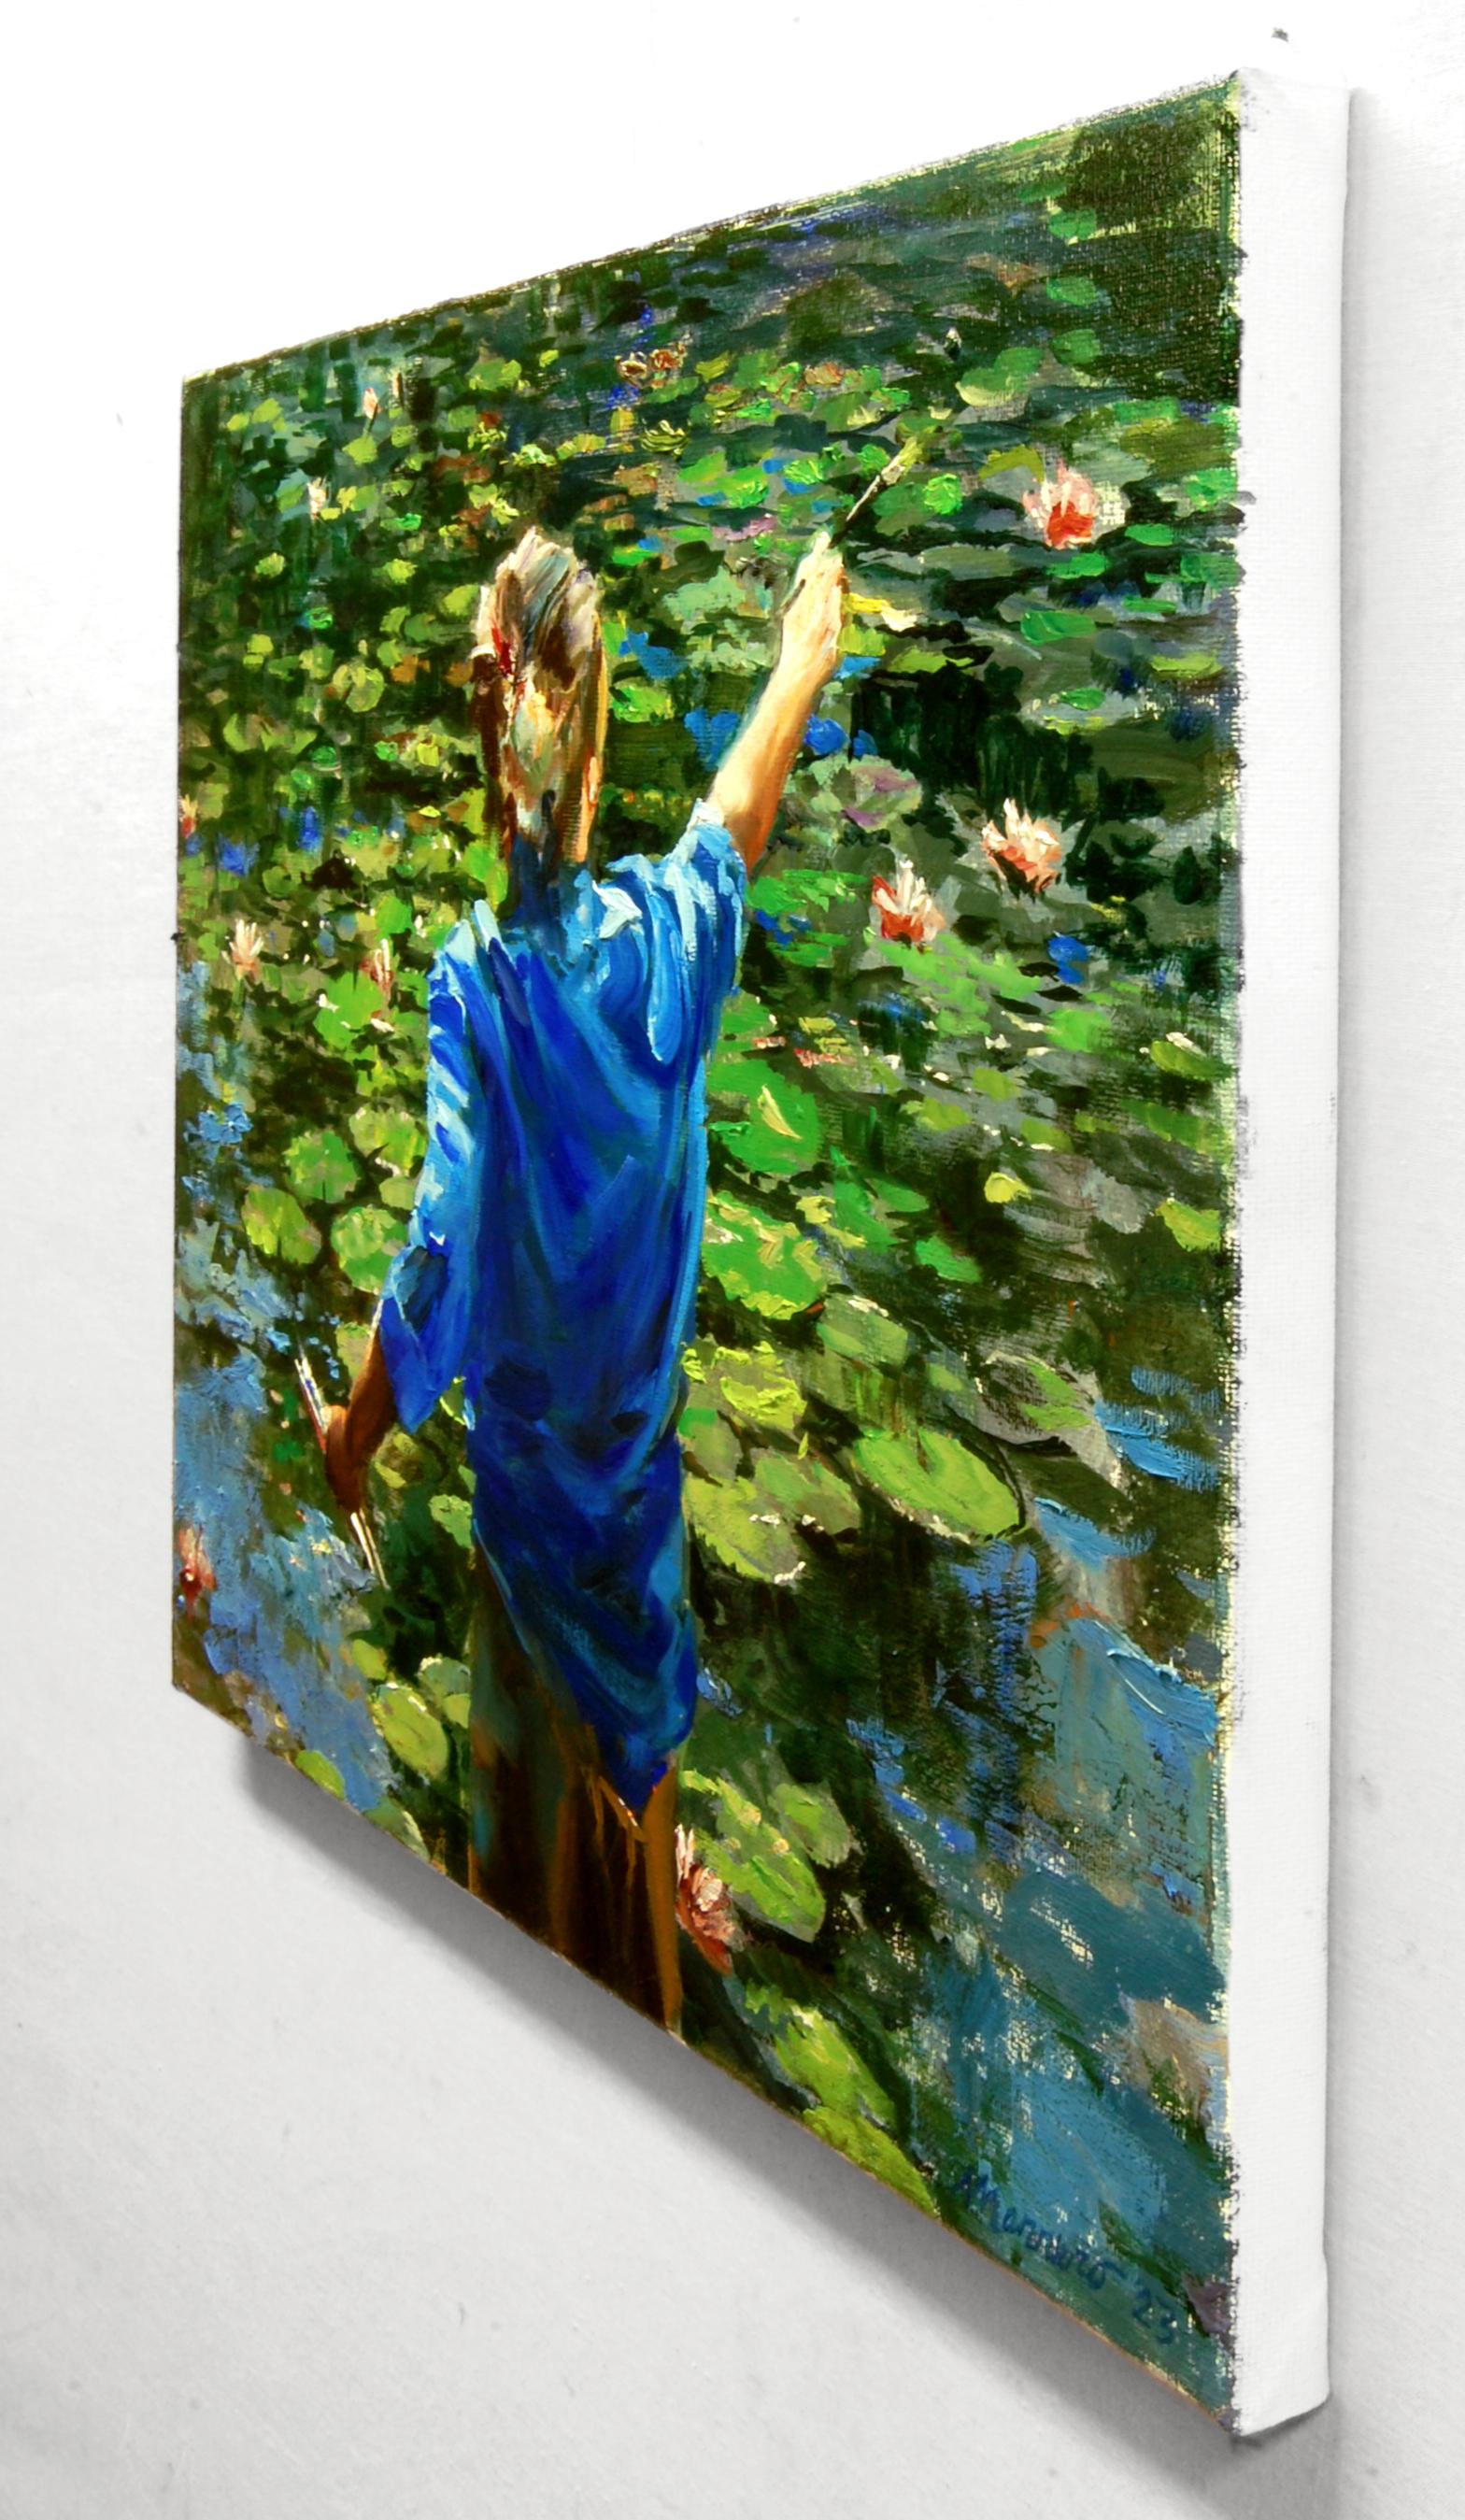 <p>Artist Comments<br>Artist Onelio Marrero enjoys observing other artists at work. This piece portrays a fellow painter working on a water lily as she nears completion. Vivid colors and loose brushwork bring the scene to life, showing Onelio's